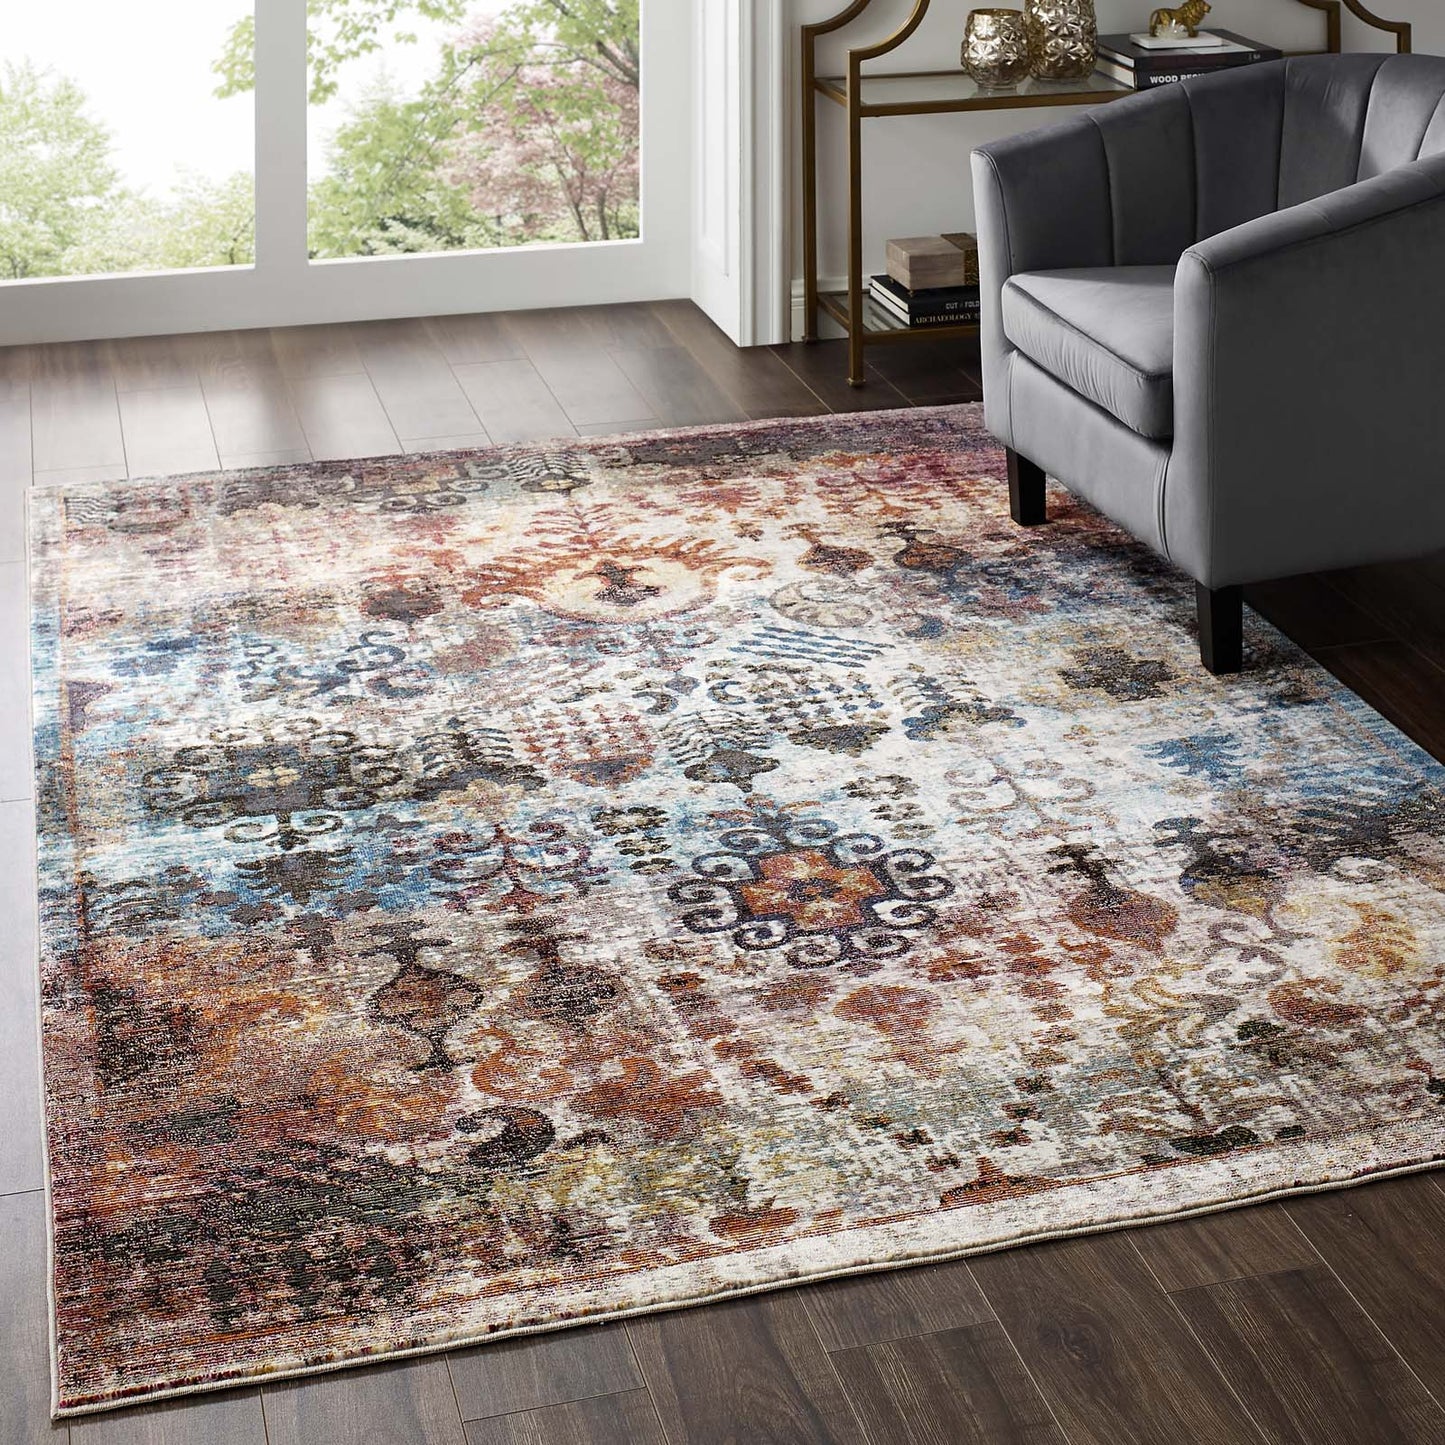 Success Tahira Transitional Distressed Vintage Floral Moroccan Trellis 5x8 Area Rug Multicolored R-1159A-58